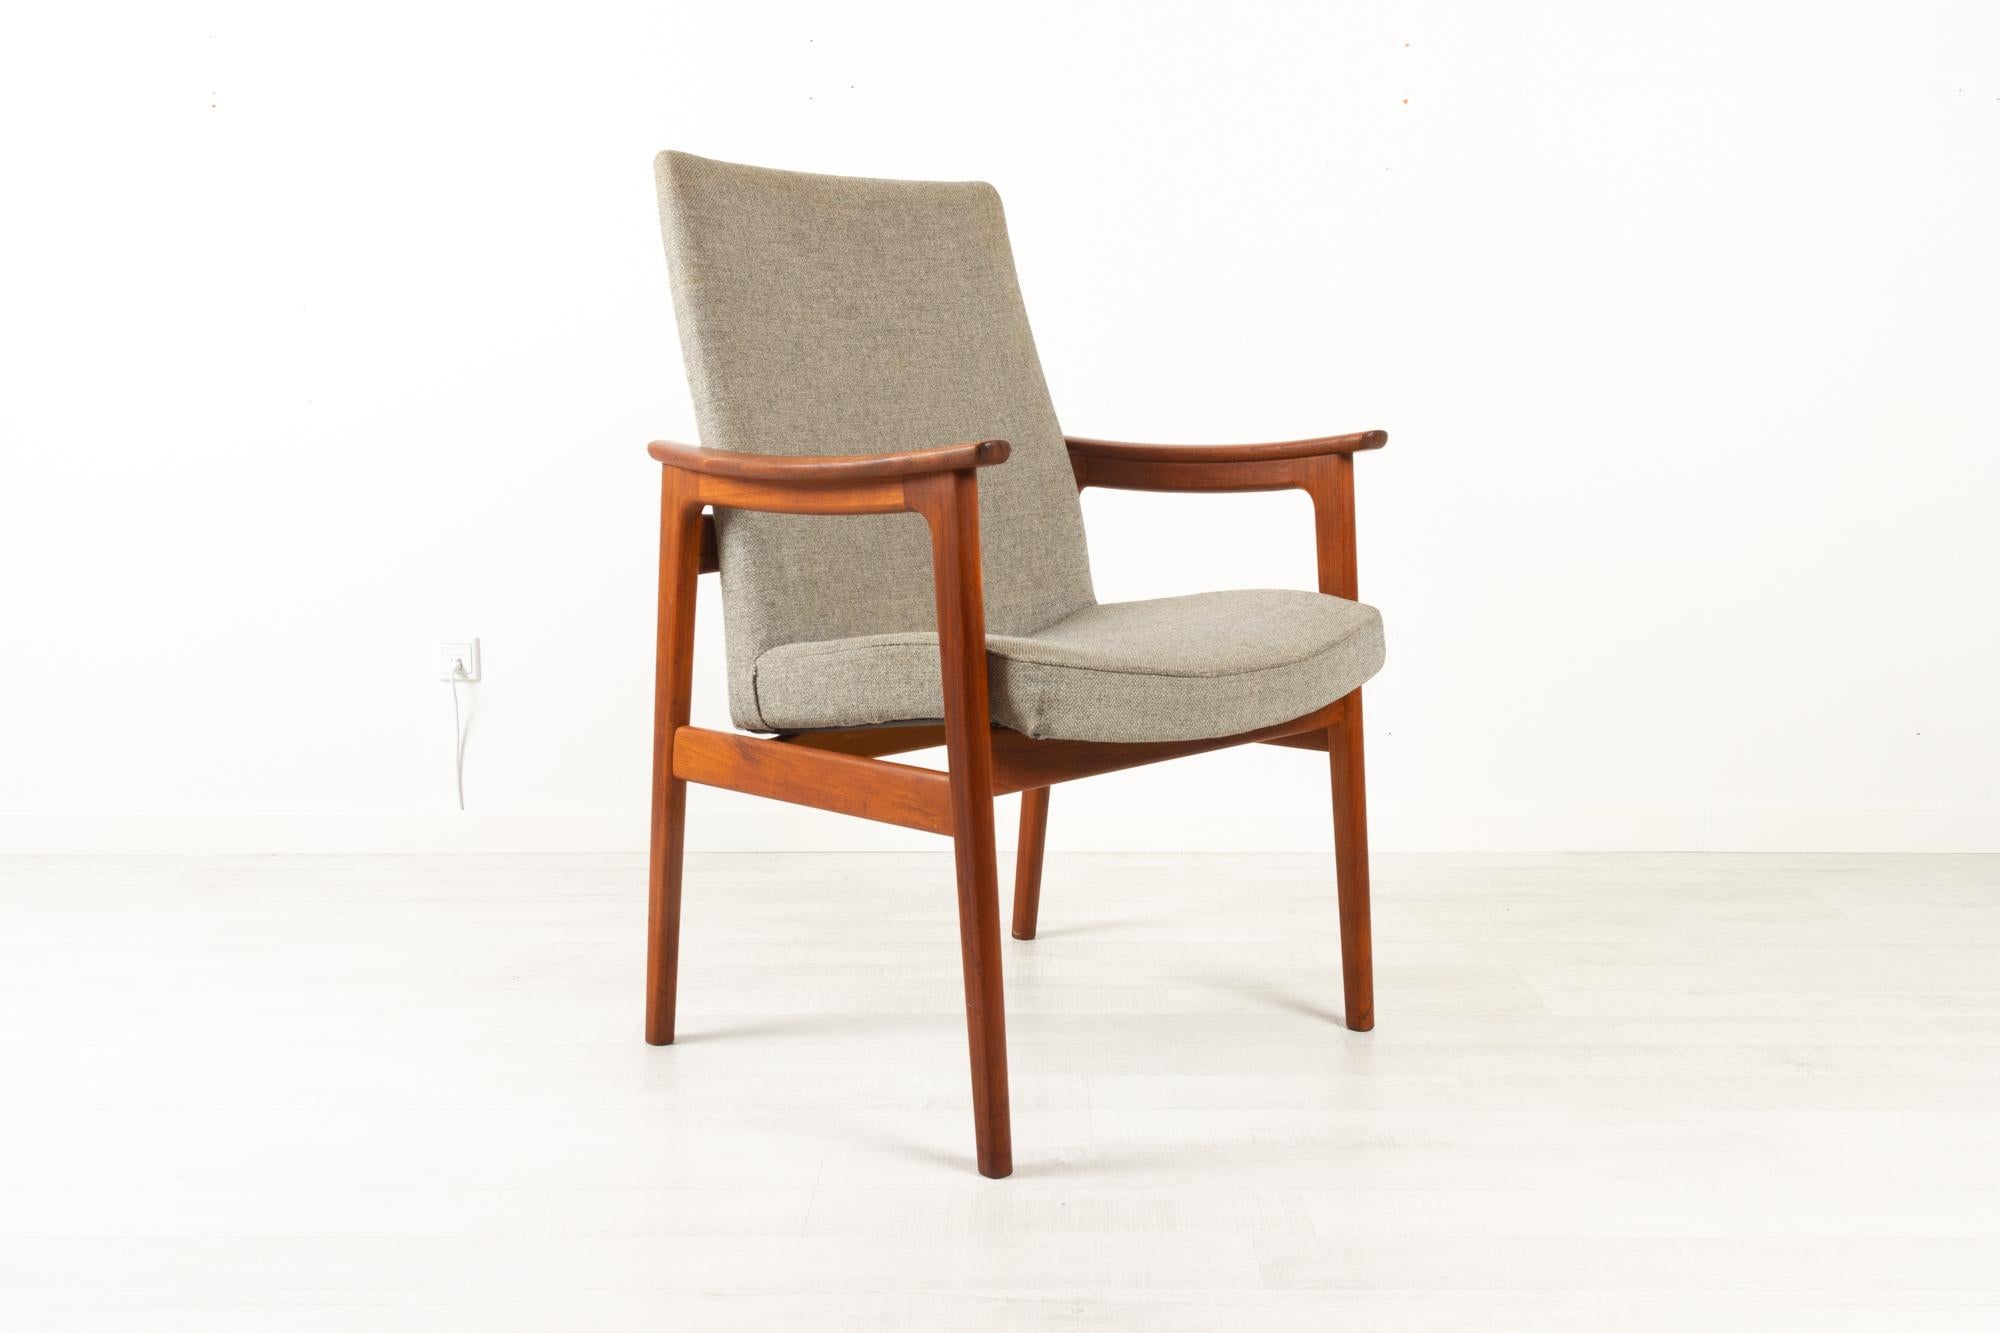 Vintage Danish armchair in teak by Erik Kierkegaard for Høng Stolefabrik 1960s.
Very comfortable and elegant Mid-Century Modern armchair in solid teak with grey wool upholstery. Curved armrests and tapered legs. High back for excellent back